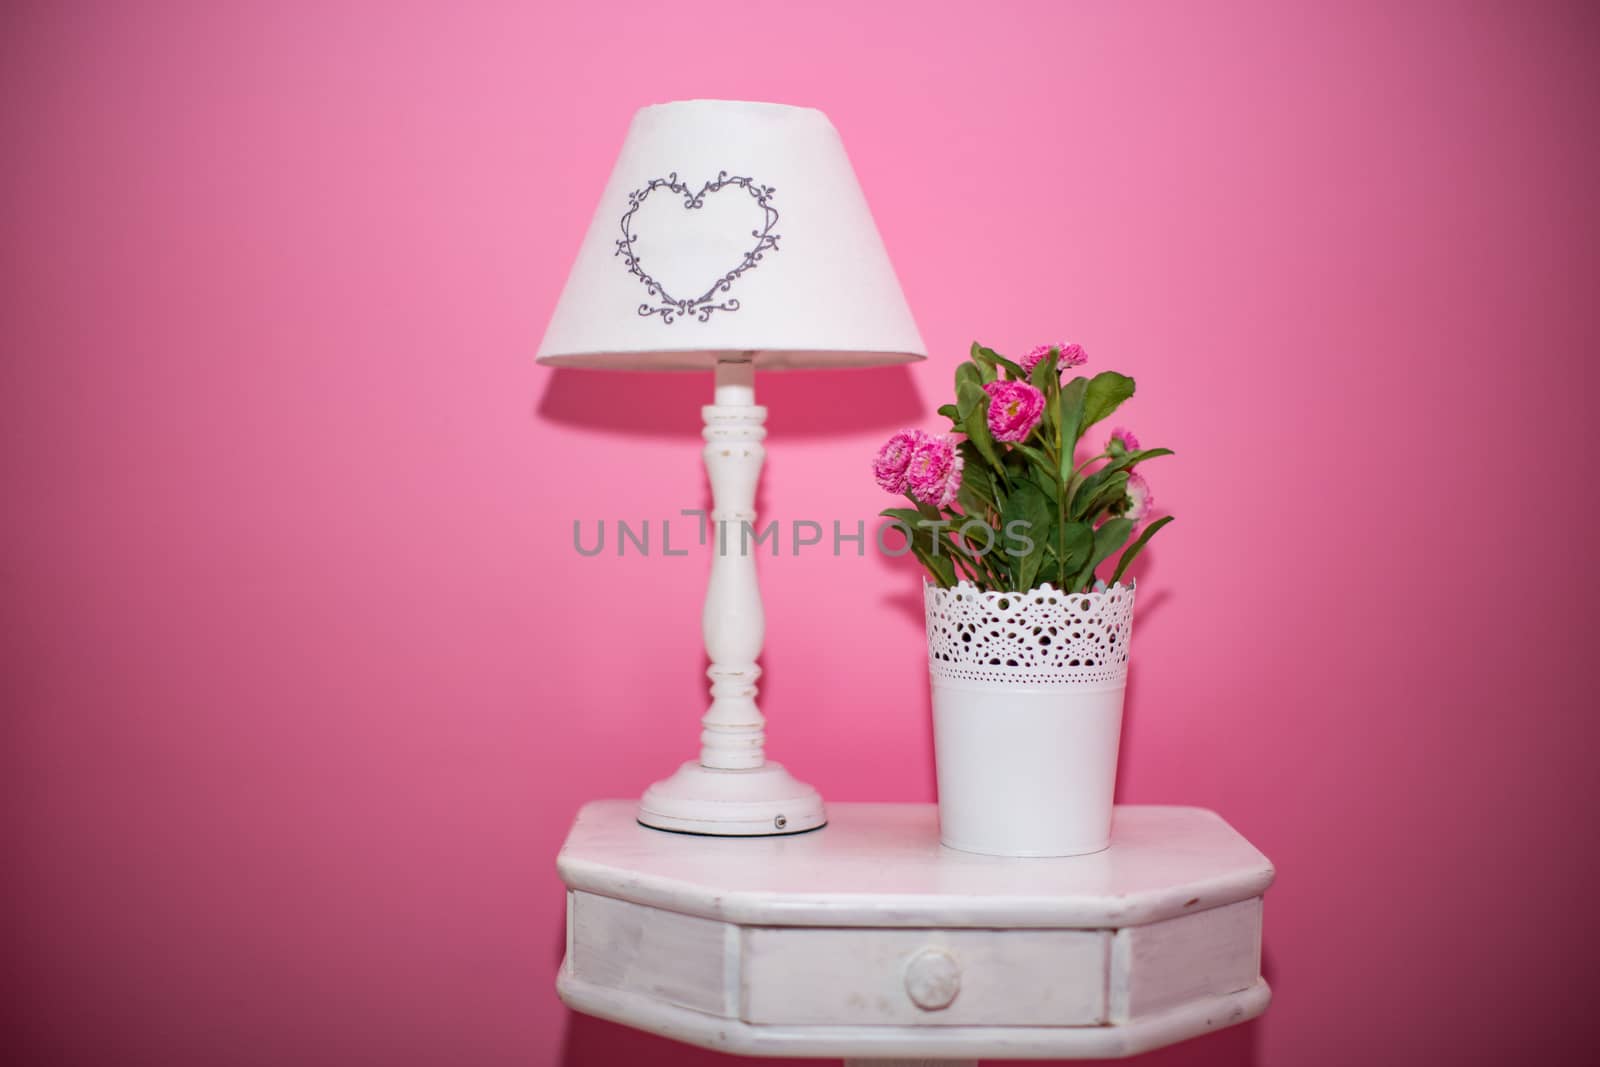 Table lamp and bouquet of flowers on a pink background. by boys1983@mail.ru